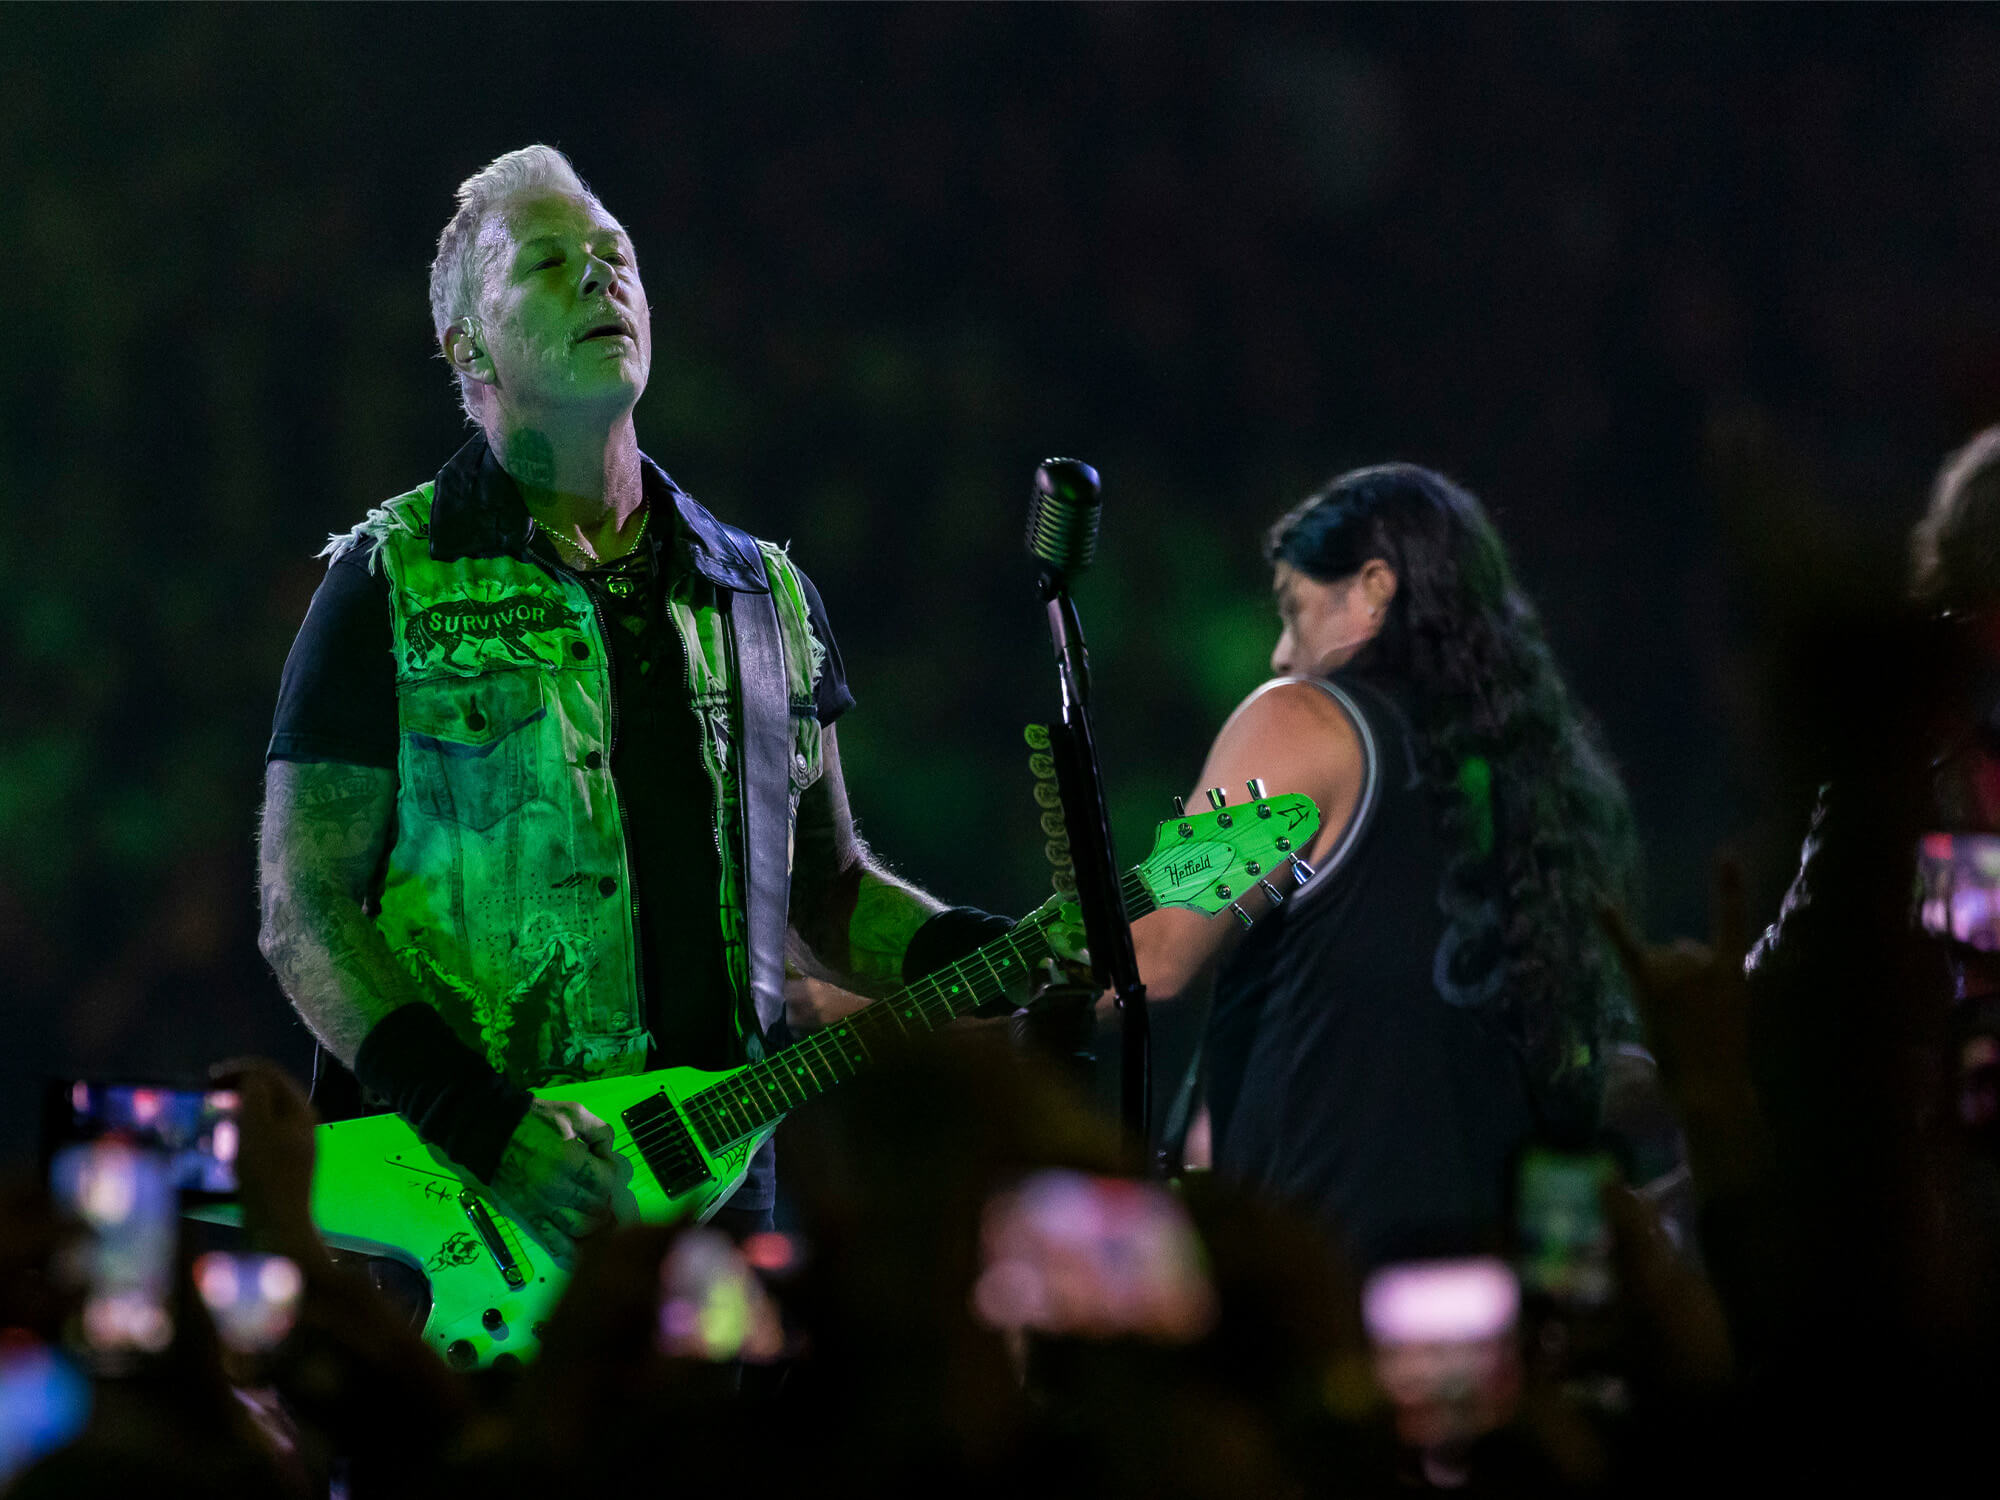 James Hetfield on stage playing guitar. He is standing by bassist Robert and is looking up above him. His face and body is illuminated by green lights.